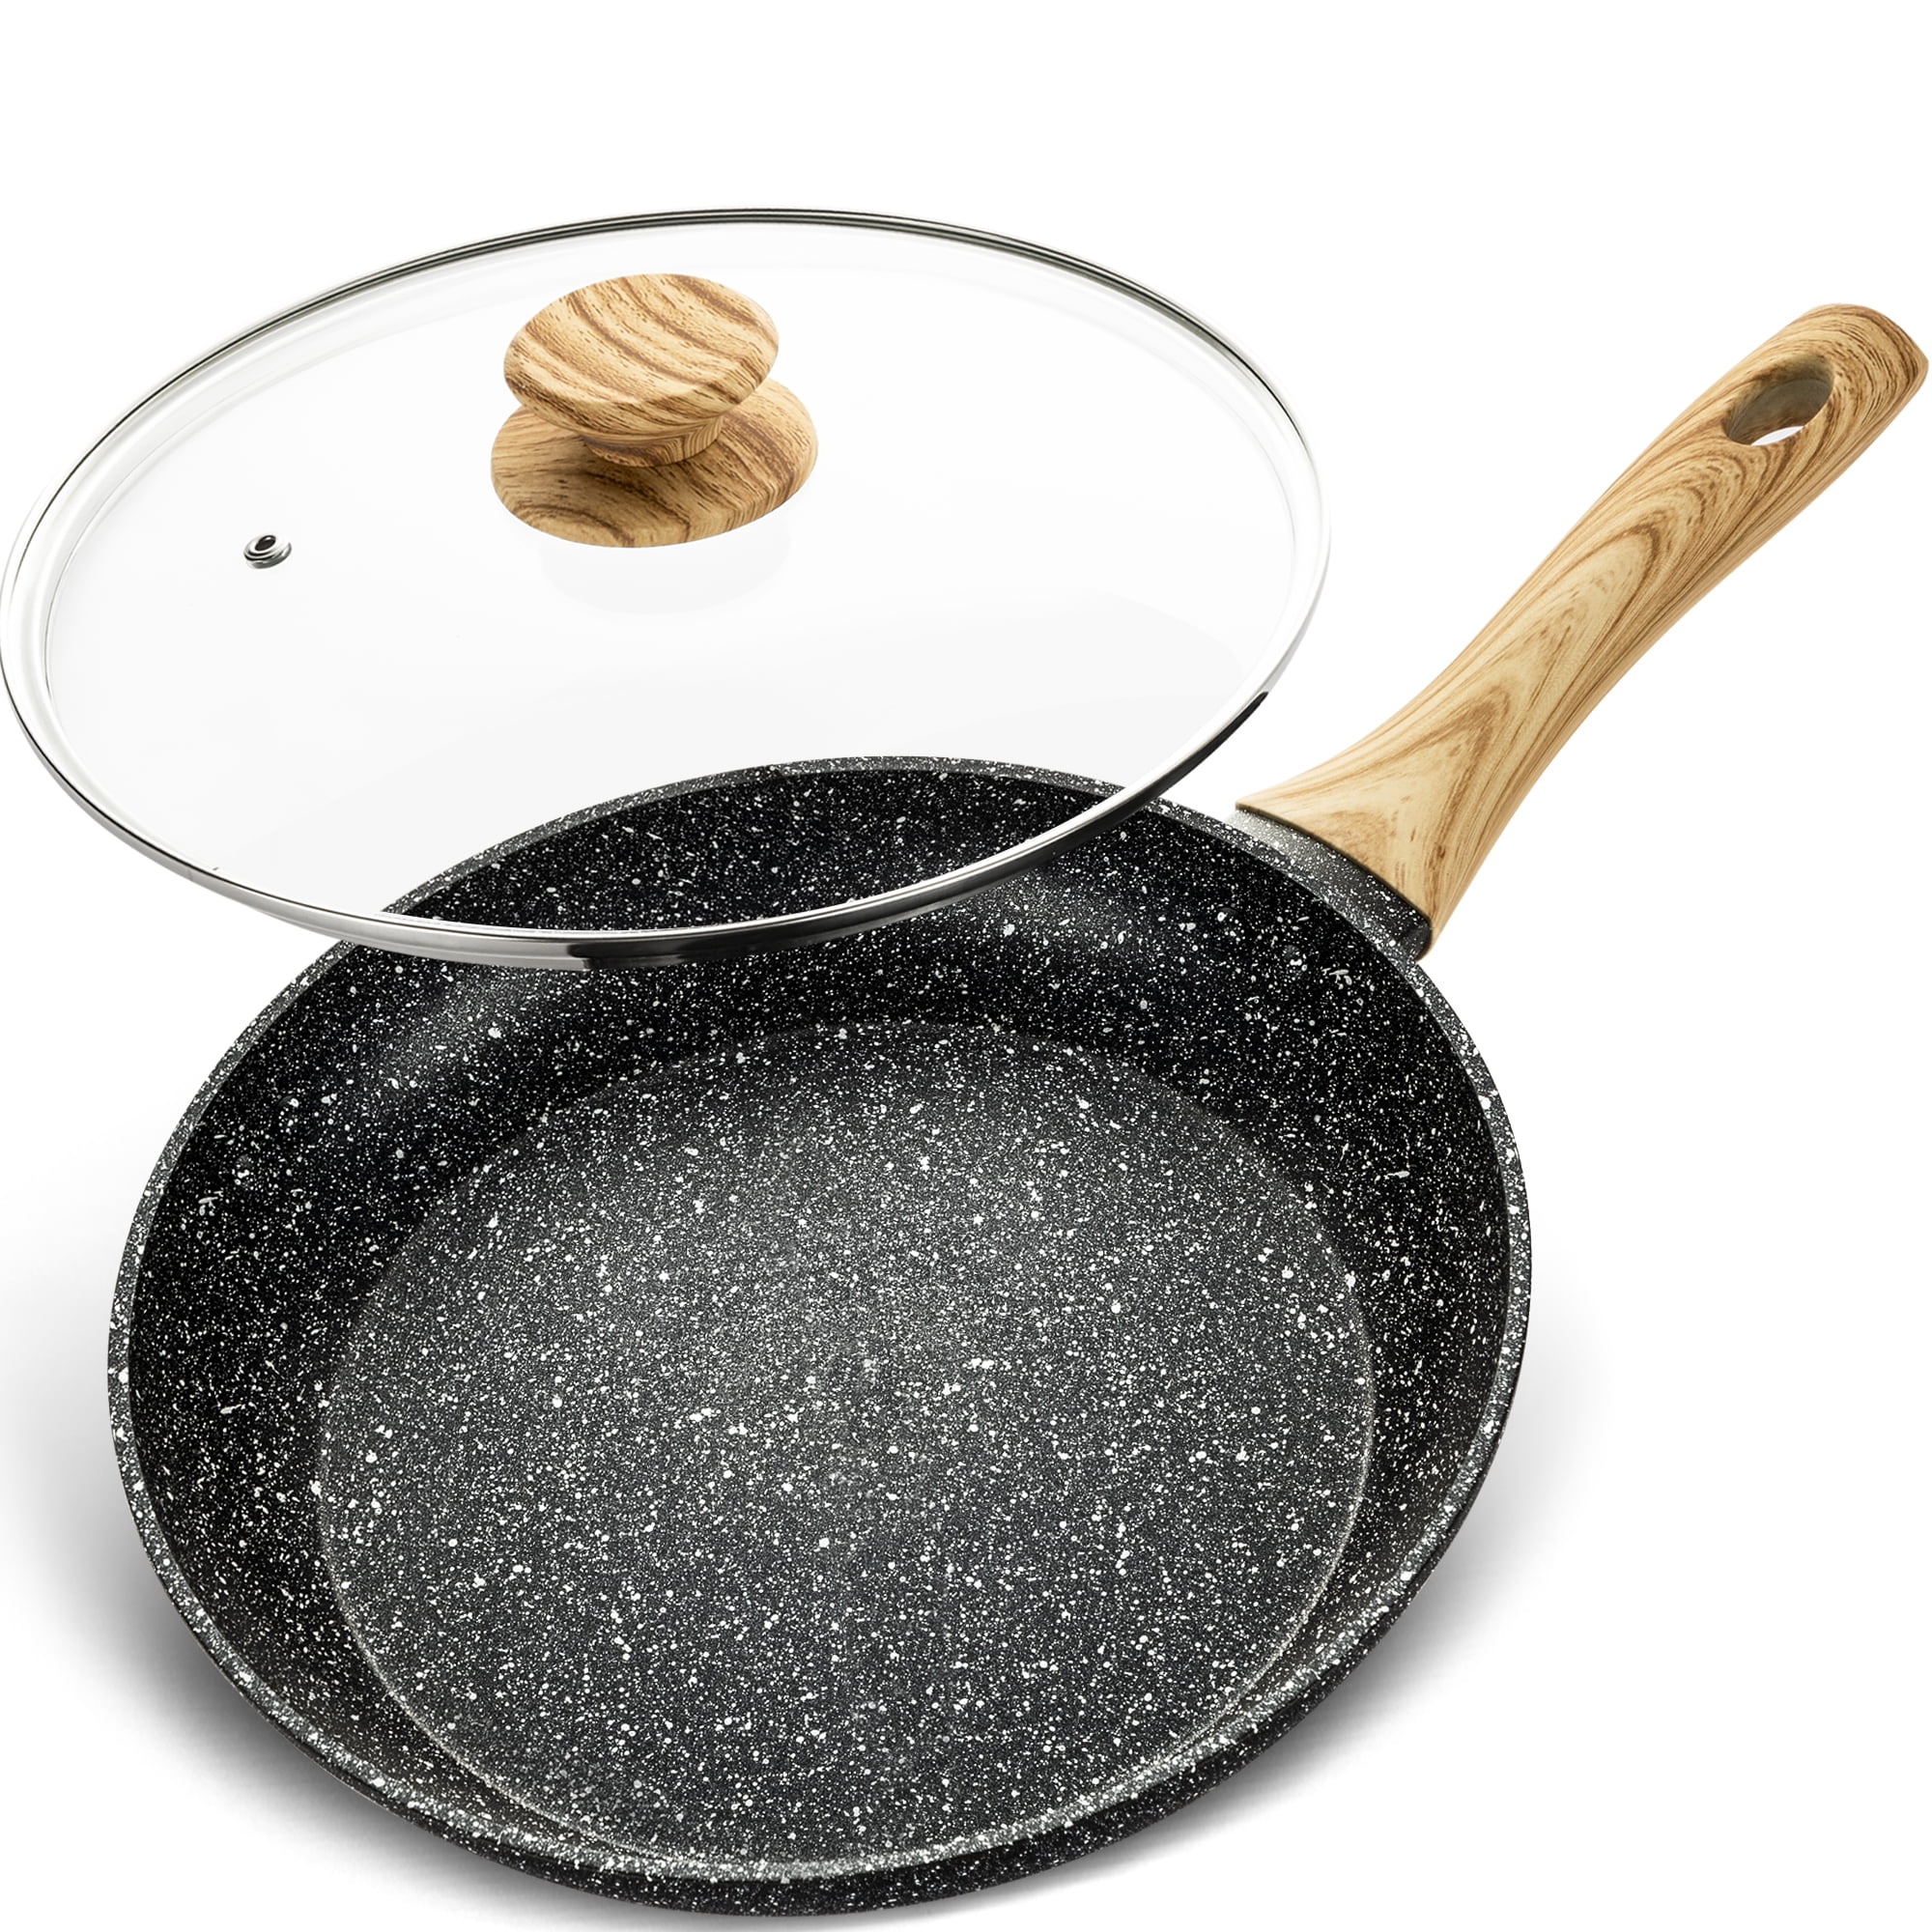 Cyrret Stone Frying Pan 12 inch, Nonstick Omelette Pan with 100%  APEO&PFOA-Free, Stone Non Stick Coating, Granite Skillet Pan for Cooking,  Nonstick